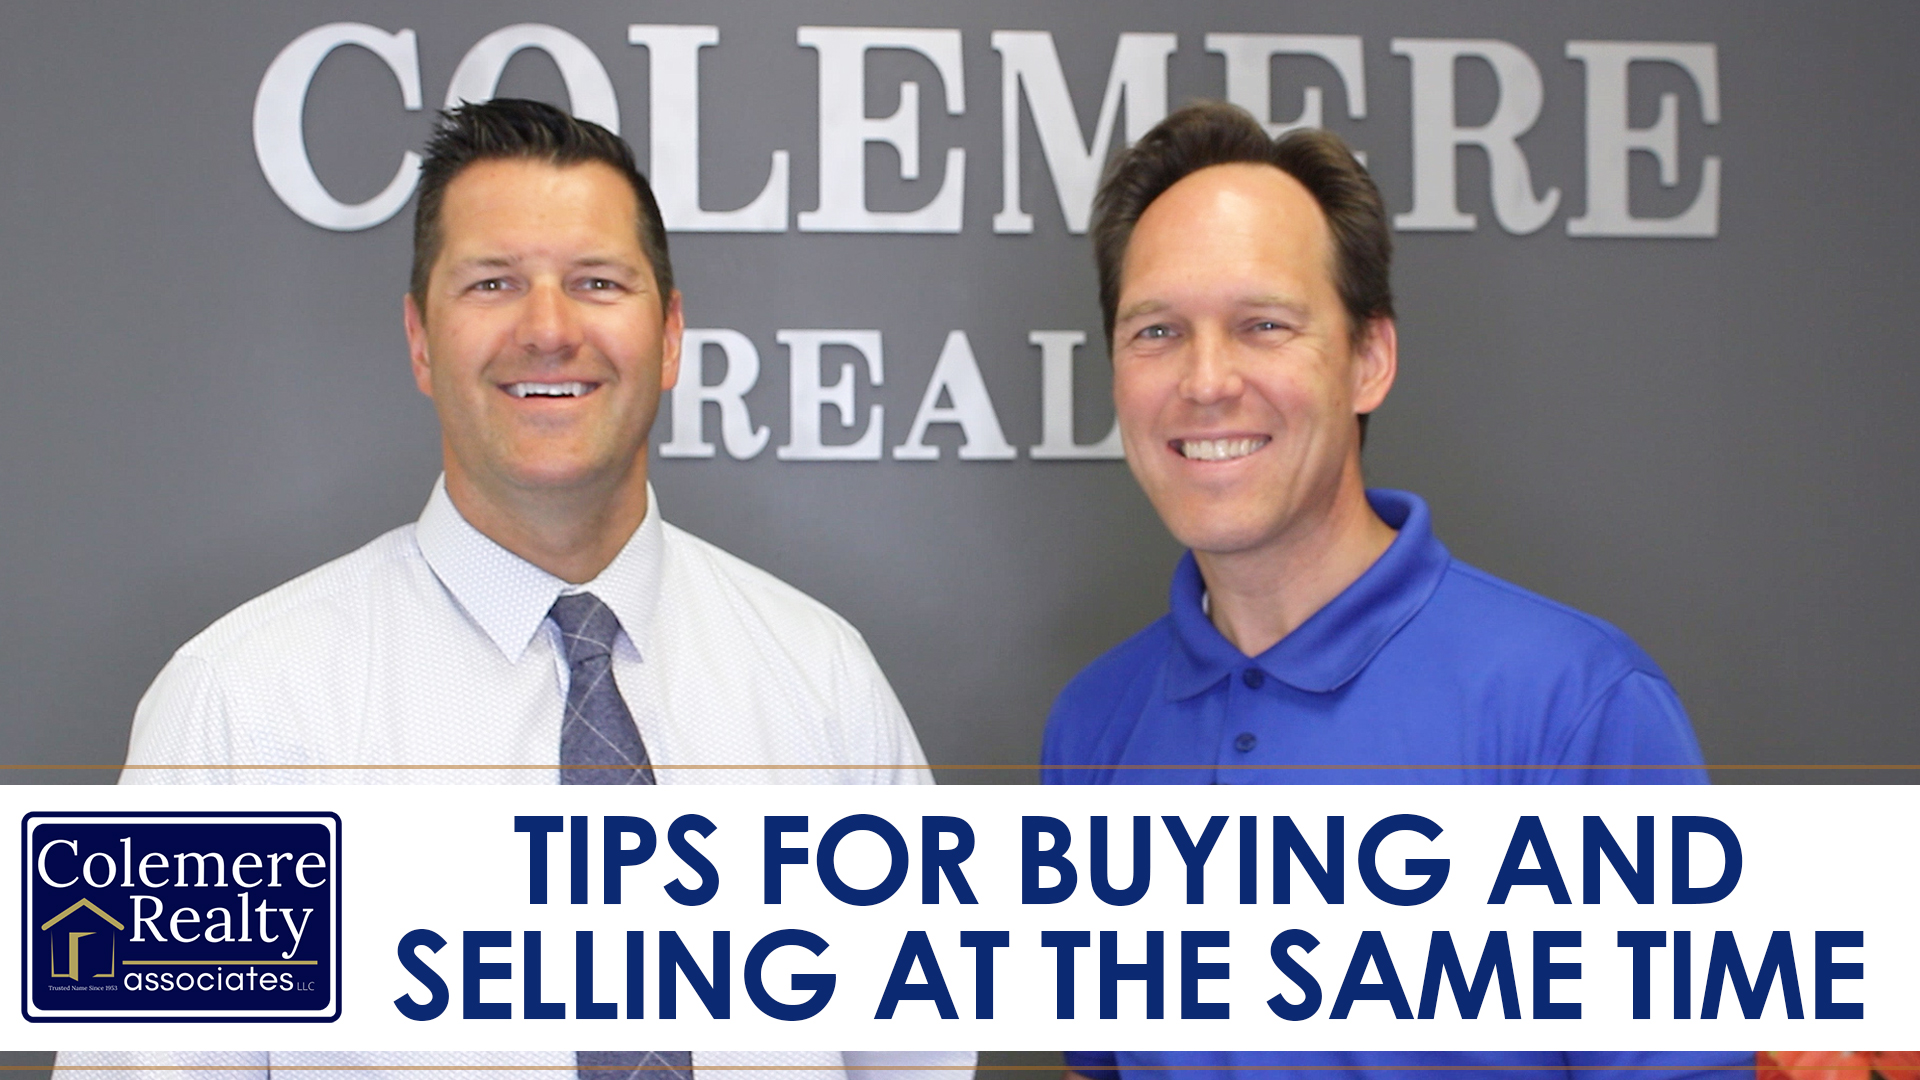 3 Tips for Buying and Selling at the Same Time